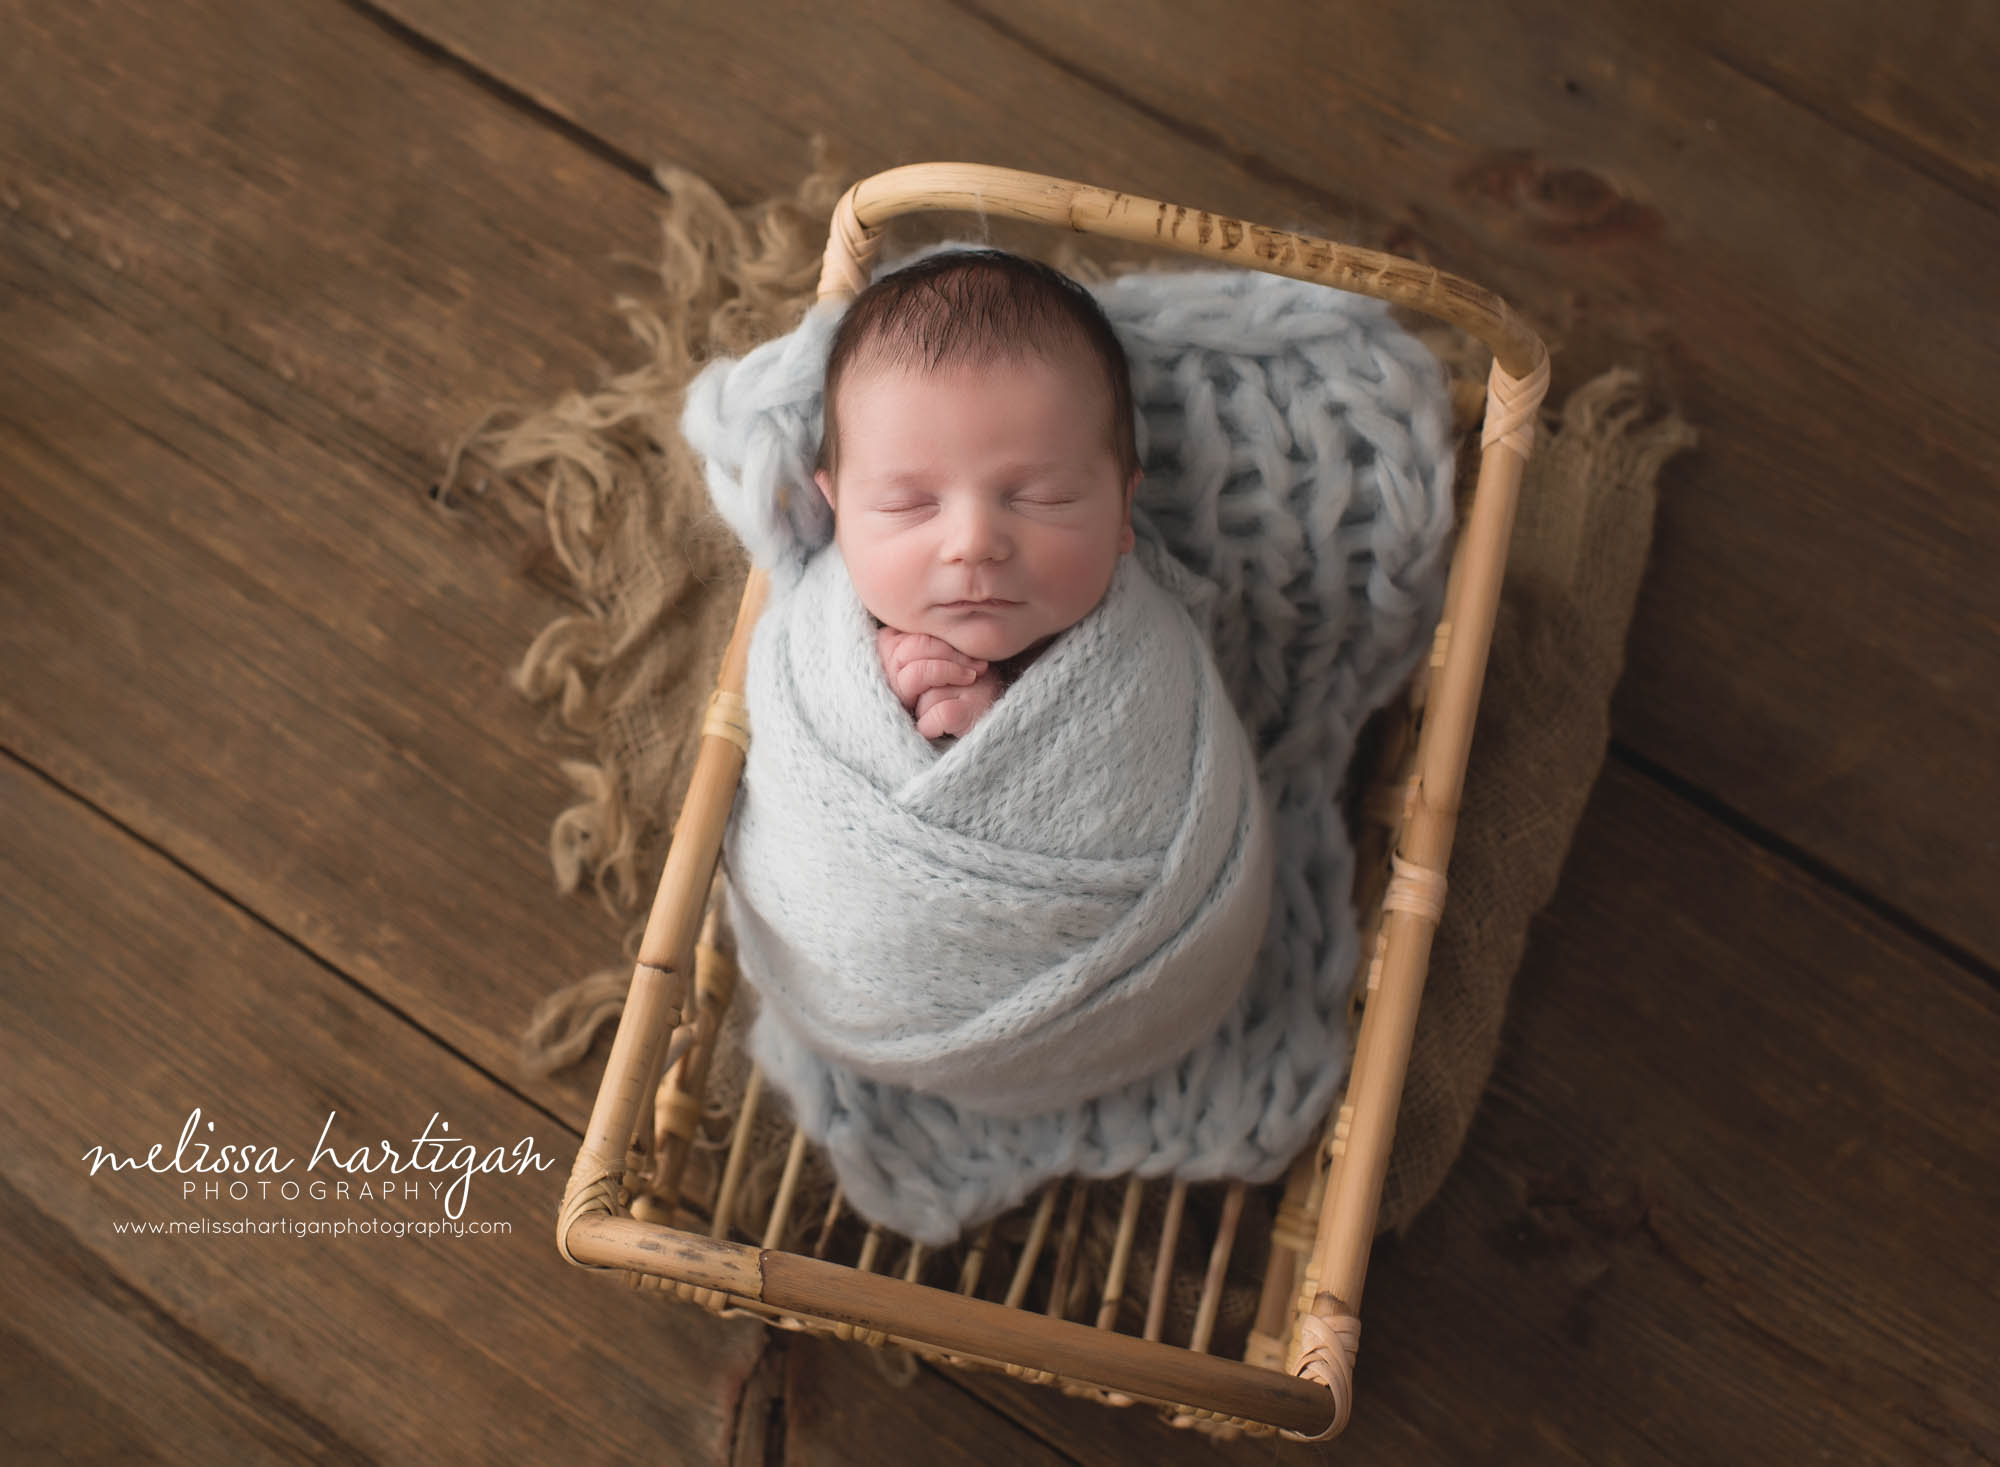 Newborn baby boy wrapped in gray wrap posed in basket connecticut newborn photographer